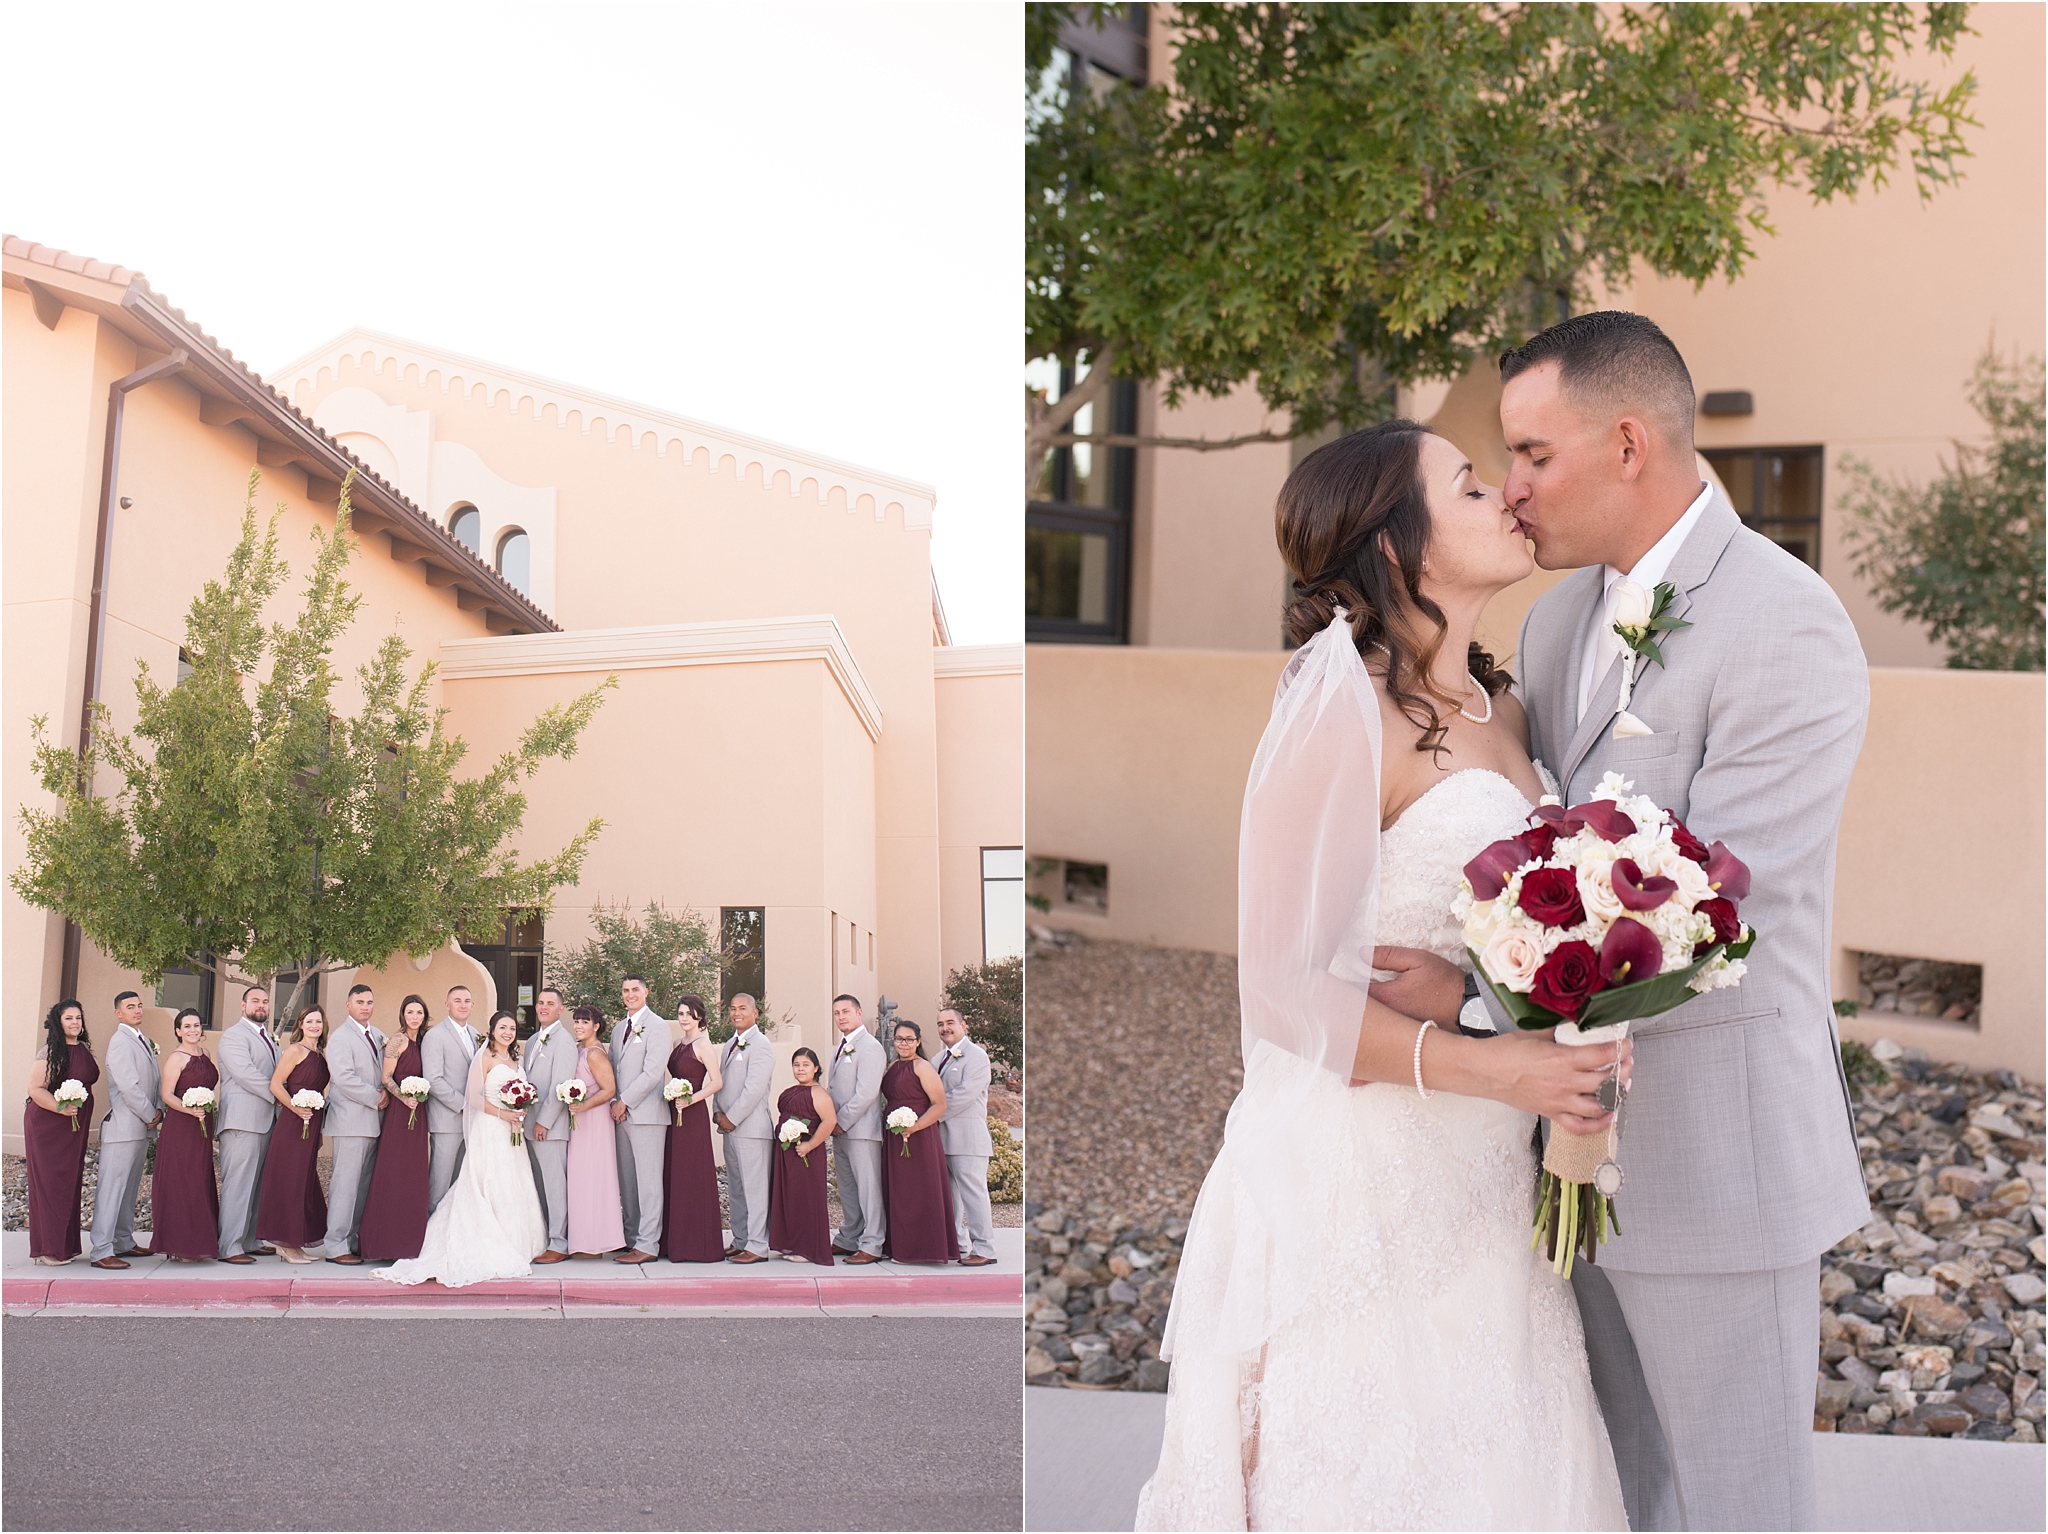 kayla kitts photography - albuquerque wedding photographer - hairpins and scissors - a cake odyssey - new mexico wedding photographer_0043.jpg